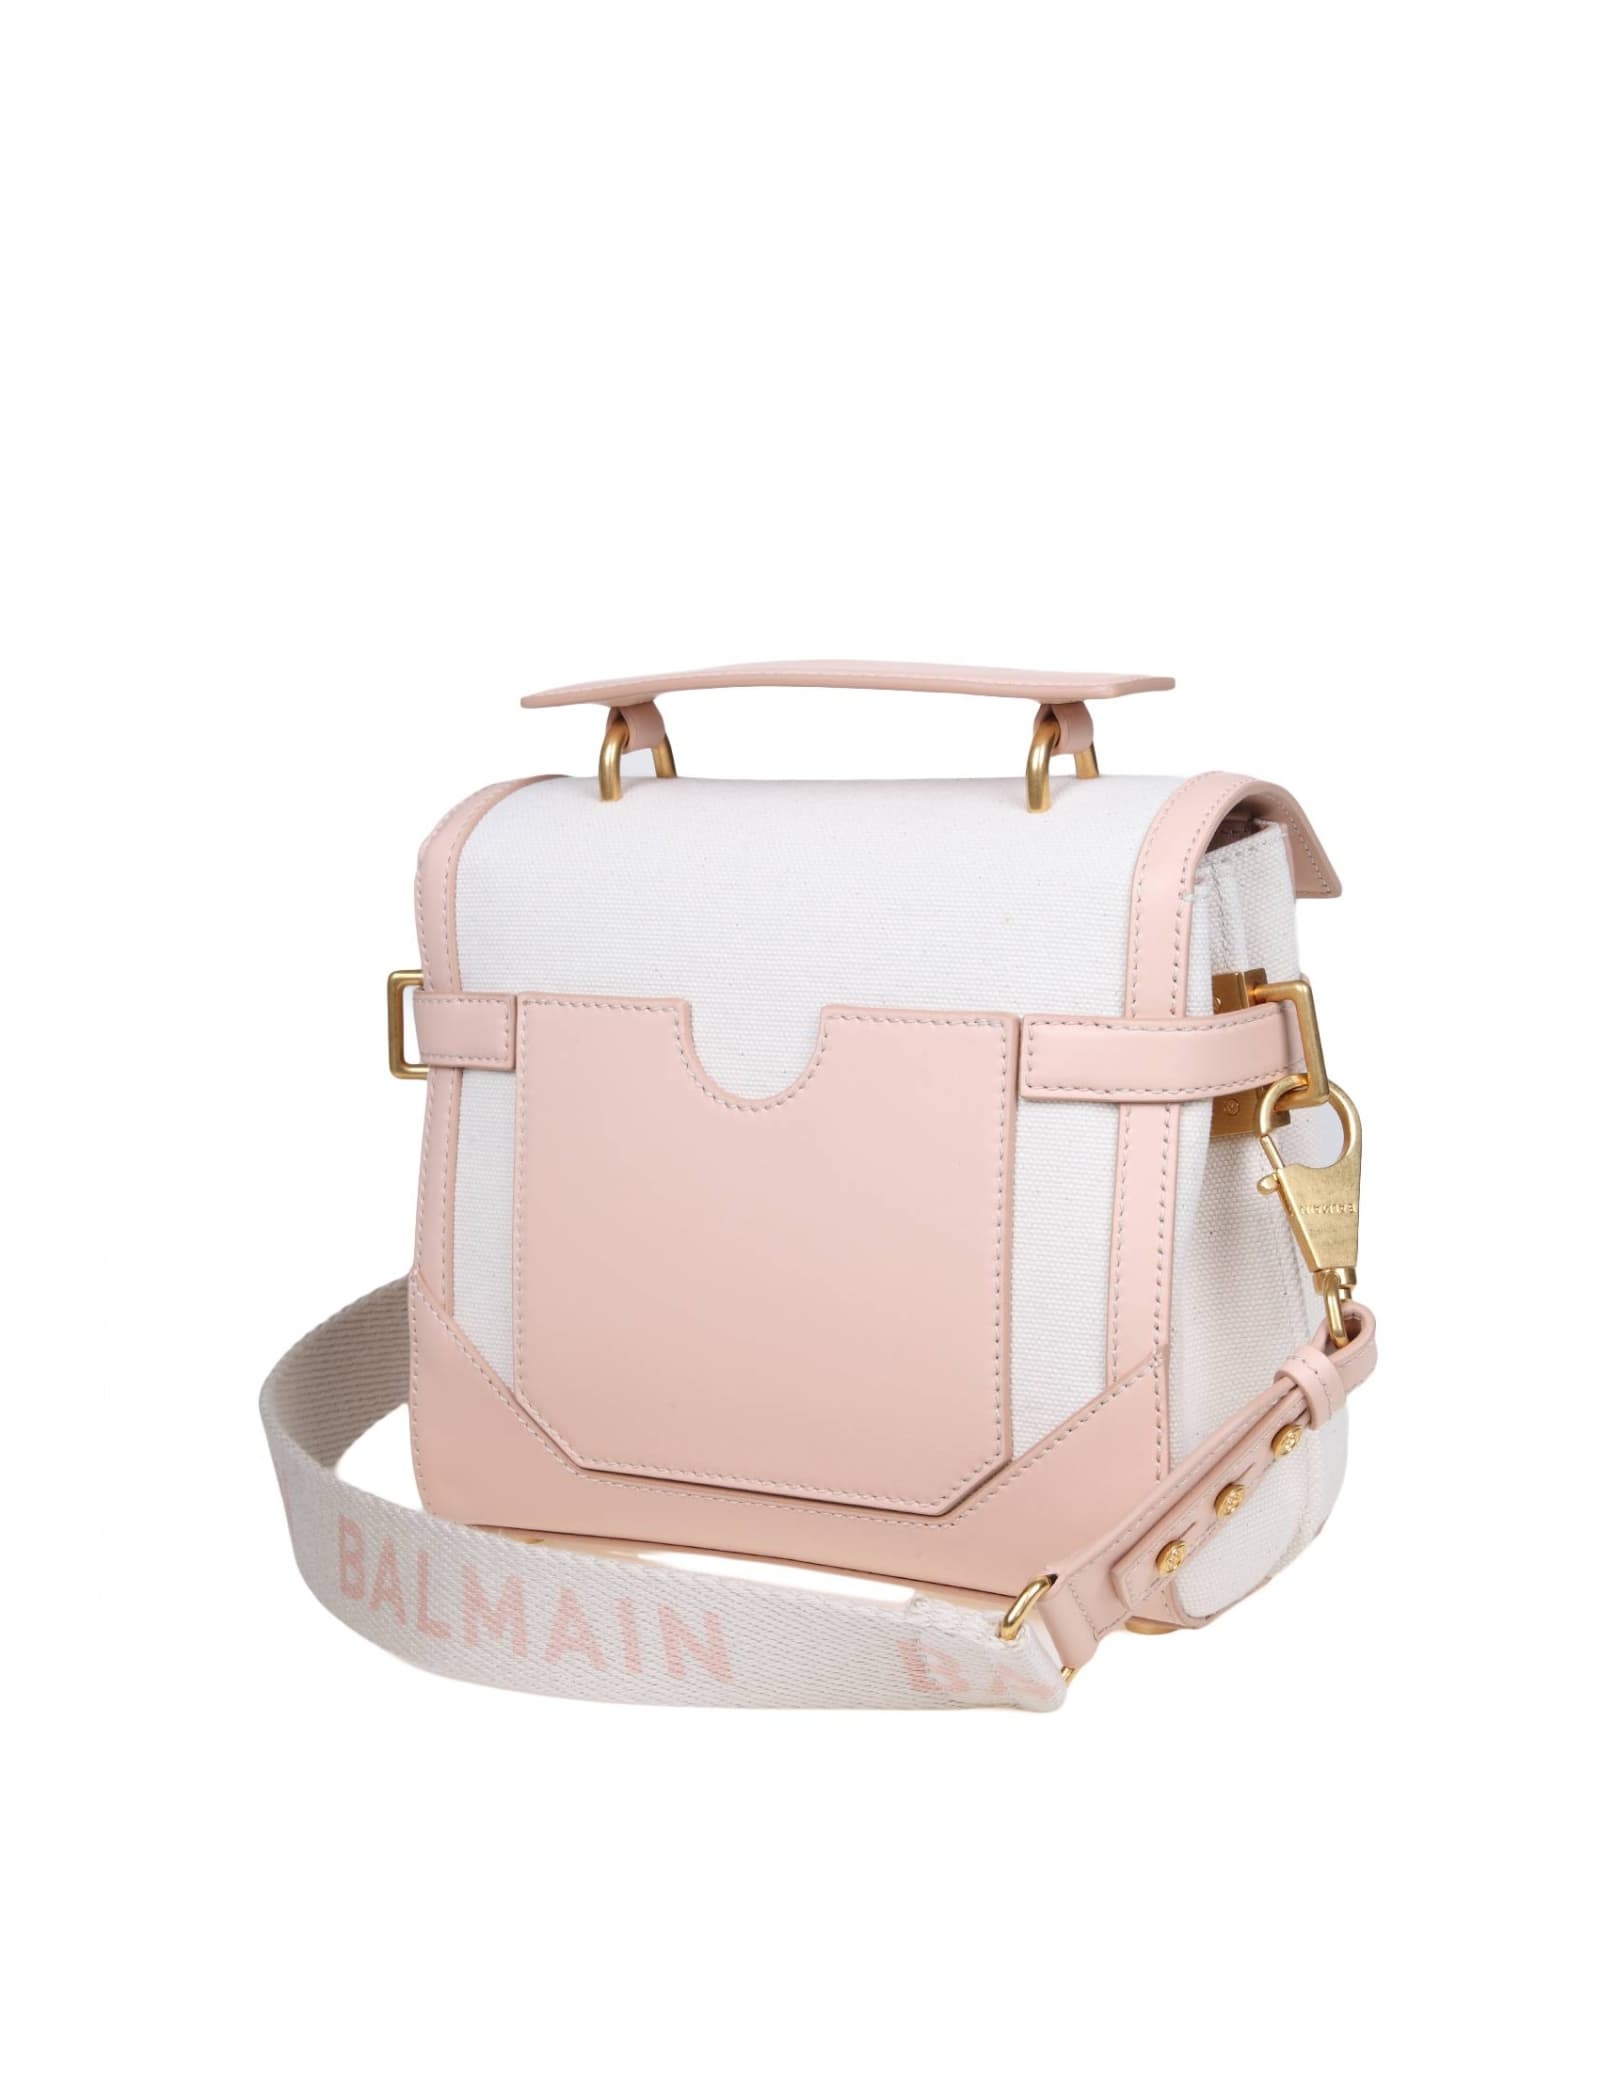 Shop Balmain B-buzz 23 Bag In Canvas And Leather In Creme/nude